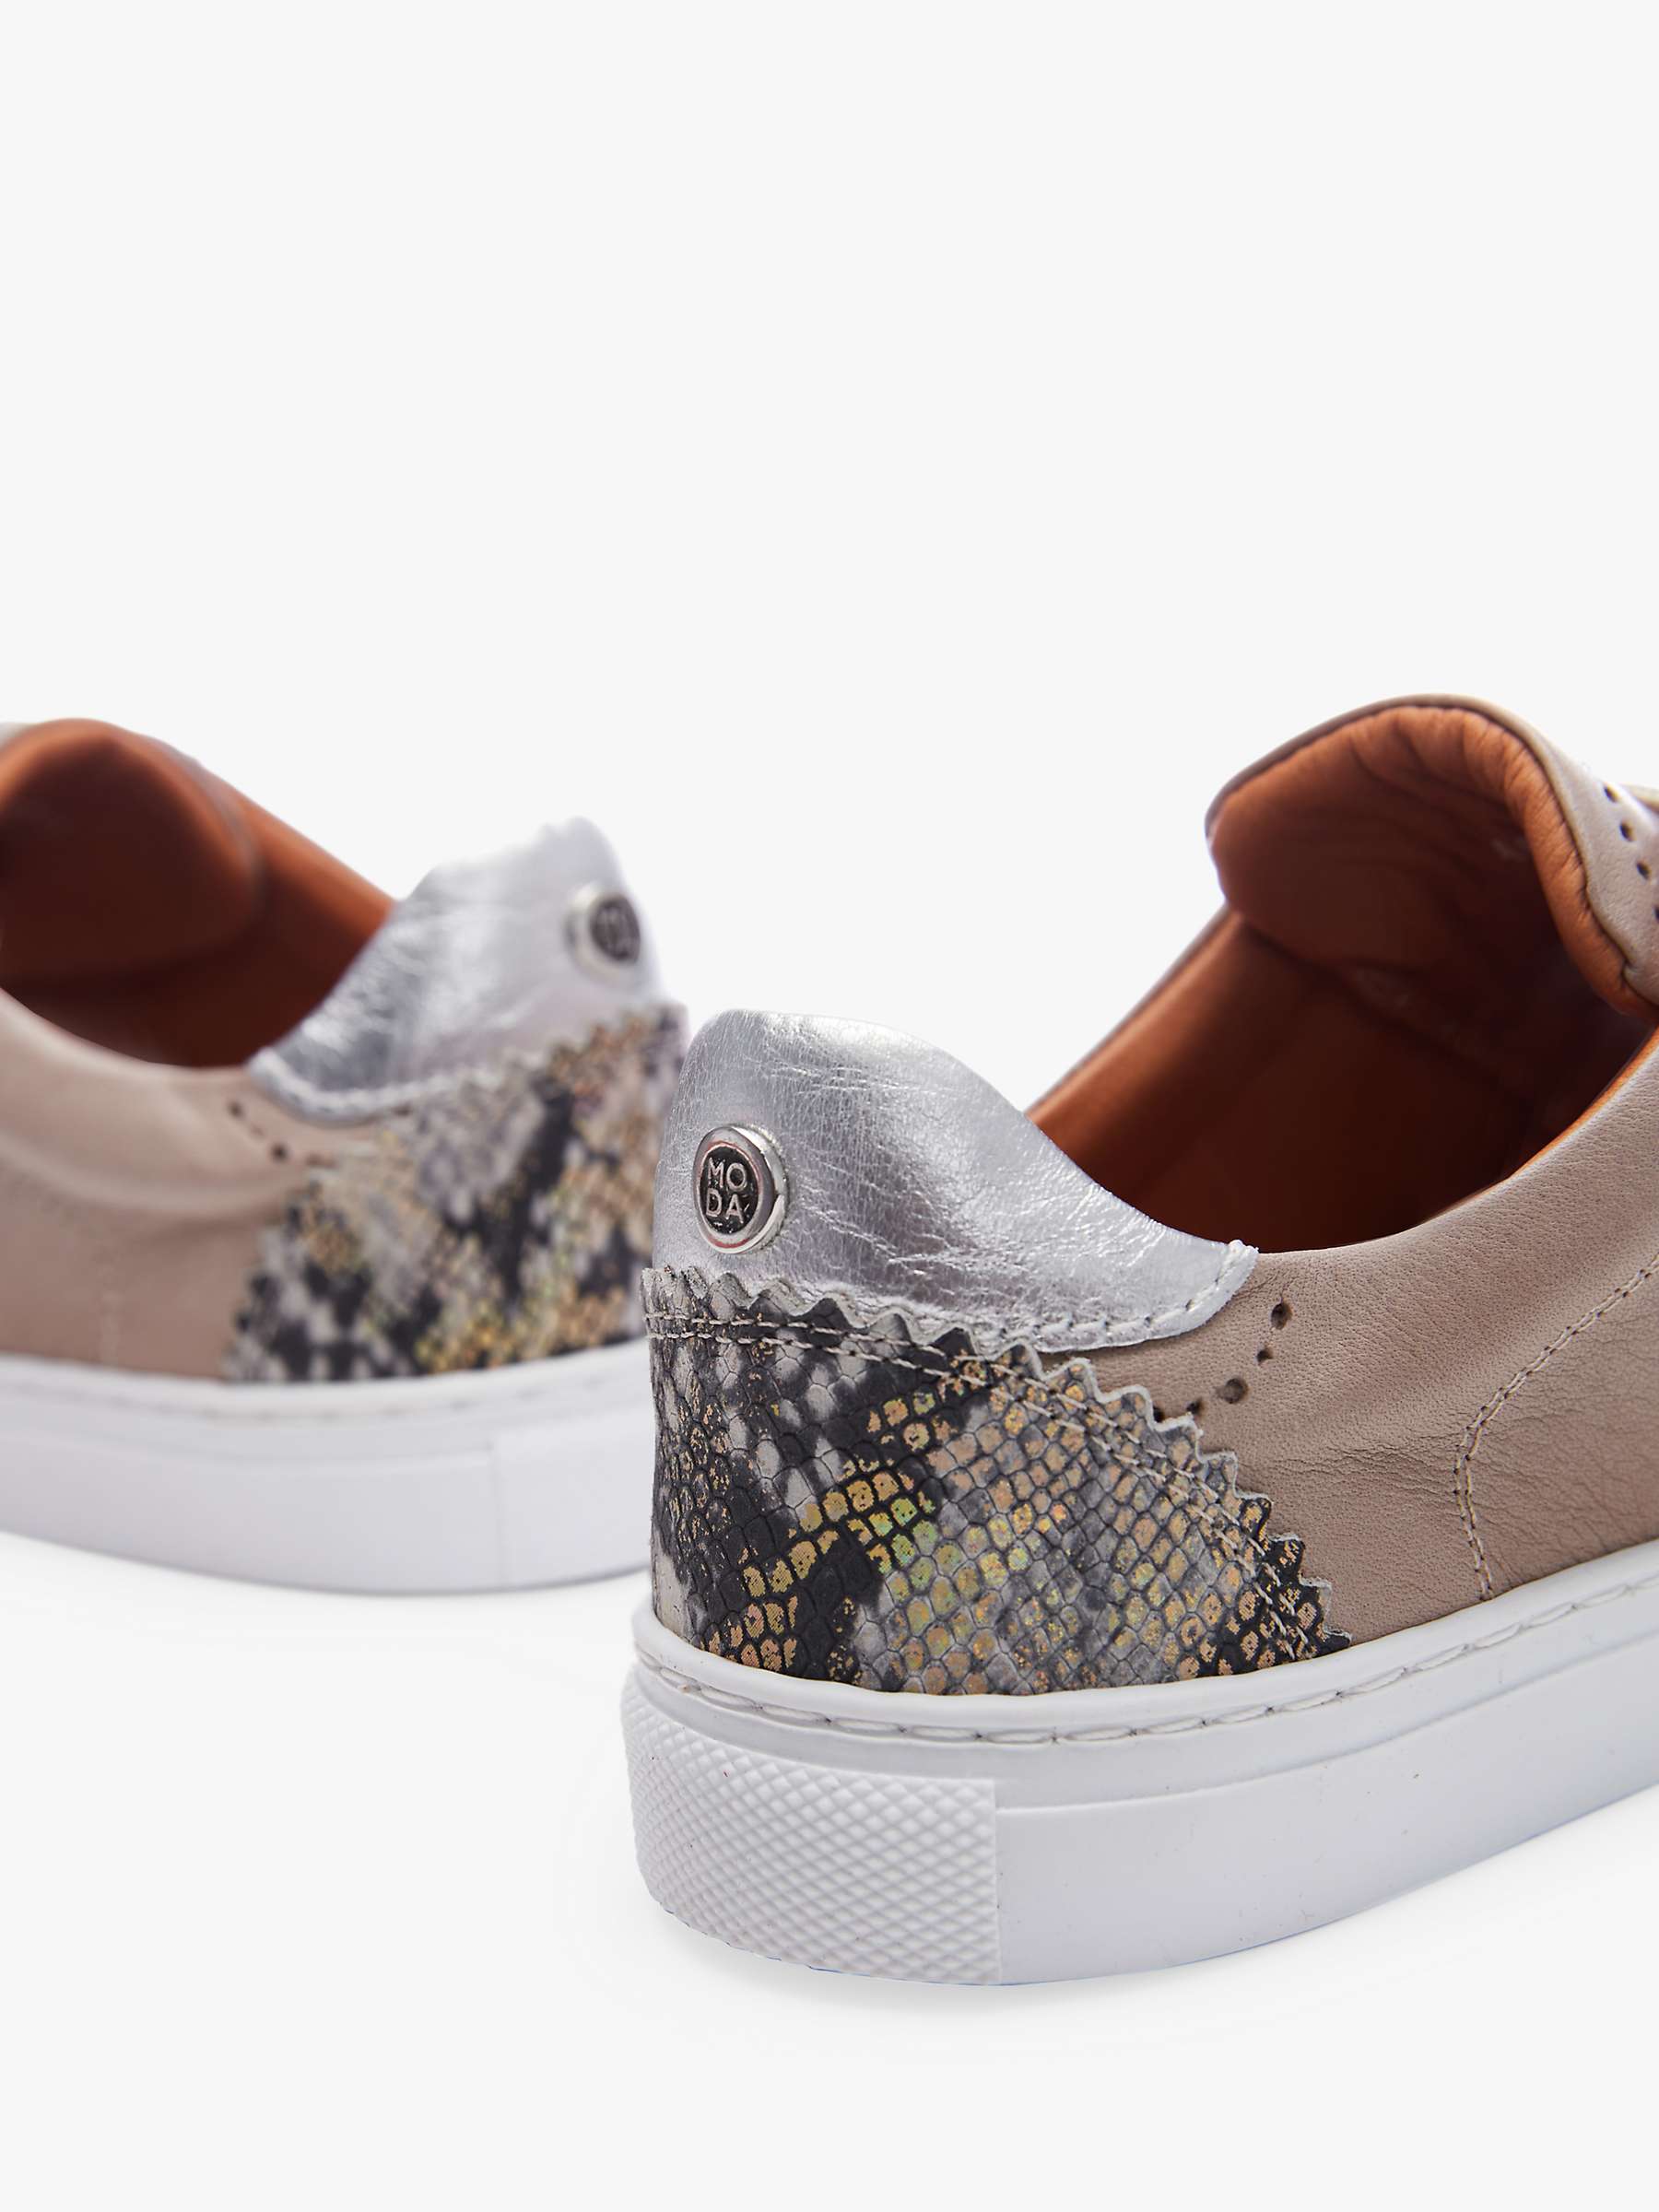 Buy Moda in Pelle Anatoli Leather Lace Up Trainers Online at johnlewis.com